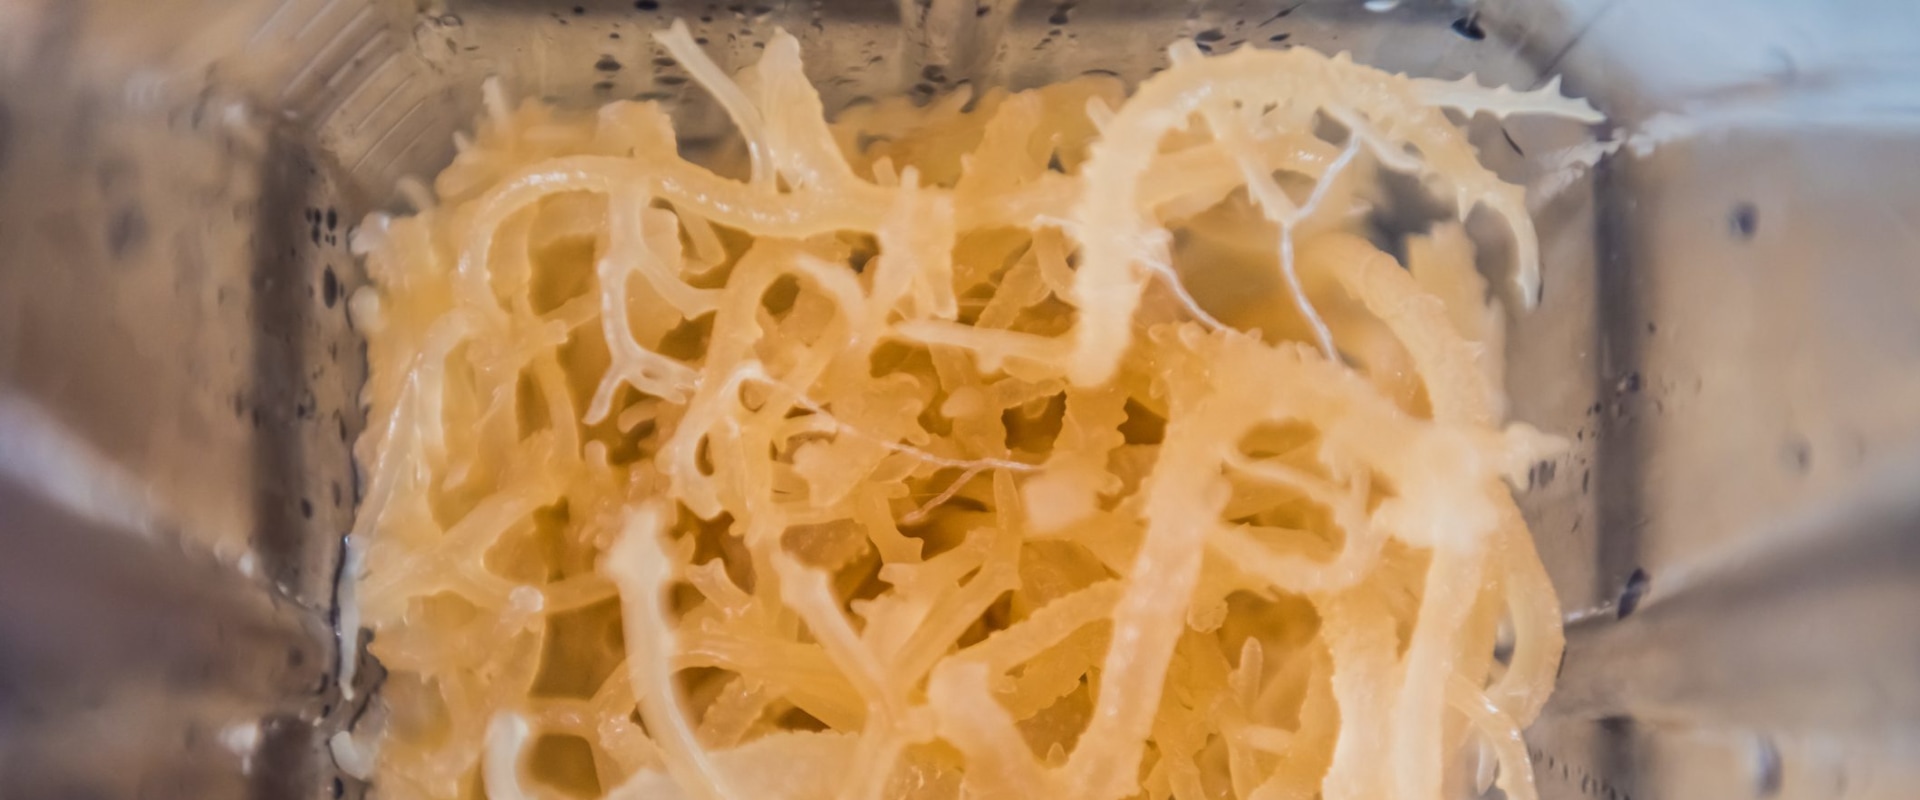 Sea Moss: Protein and Carbohydrate Content Explored